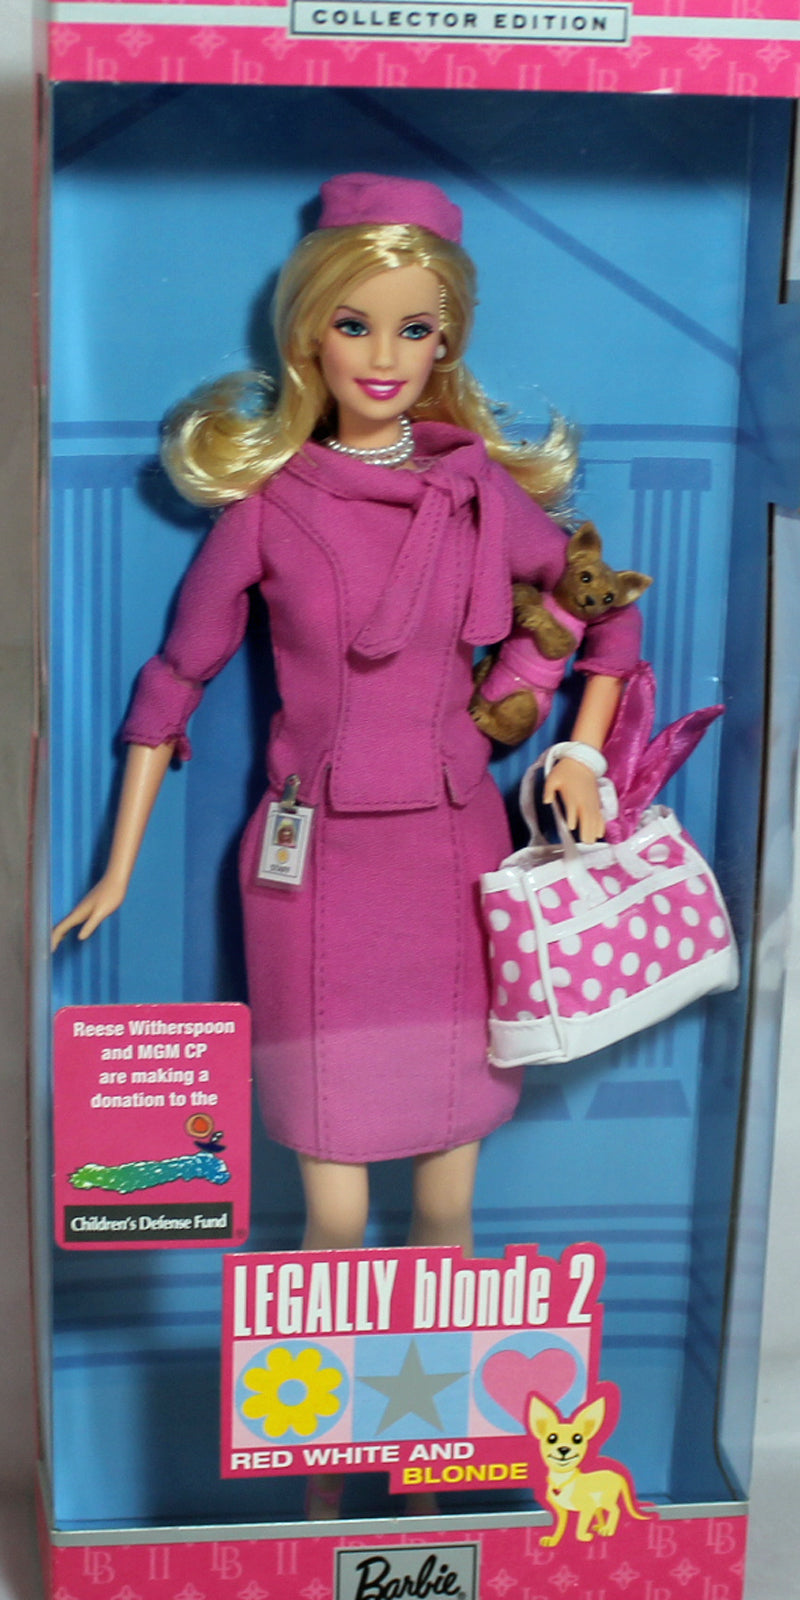 2003 Red White & Blonde Barbie (B9234) - Legally Blonde 2